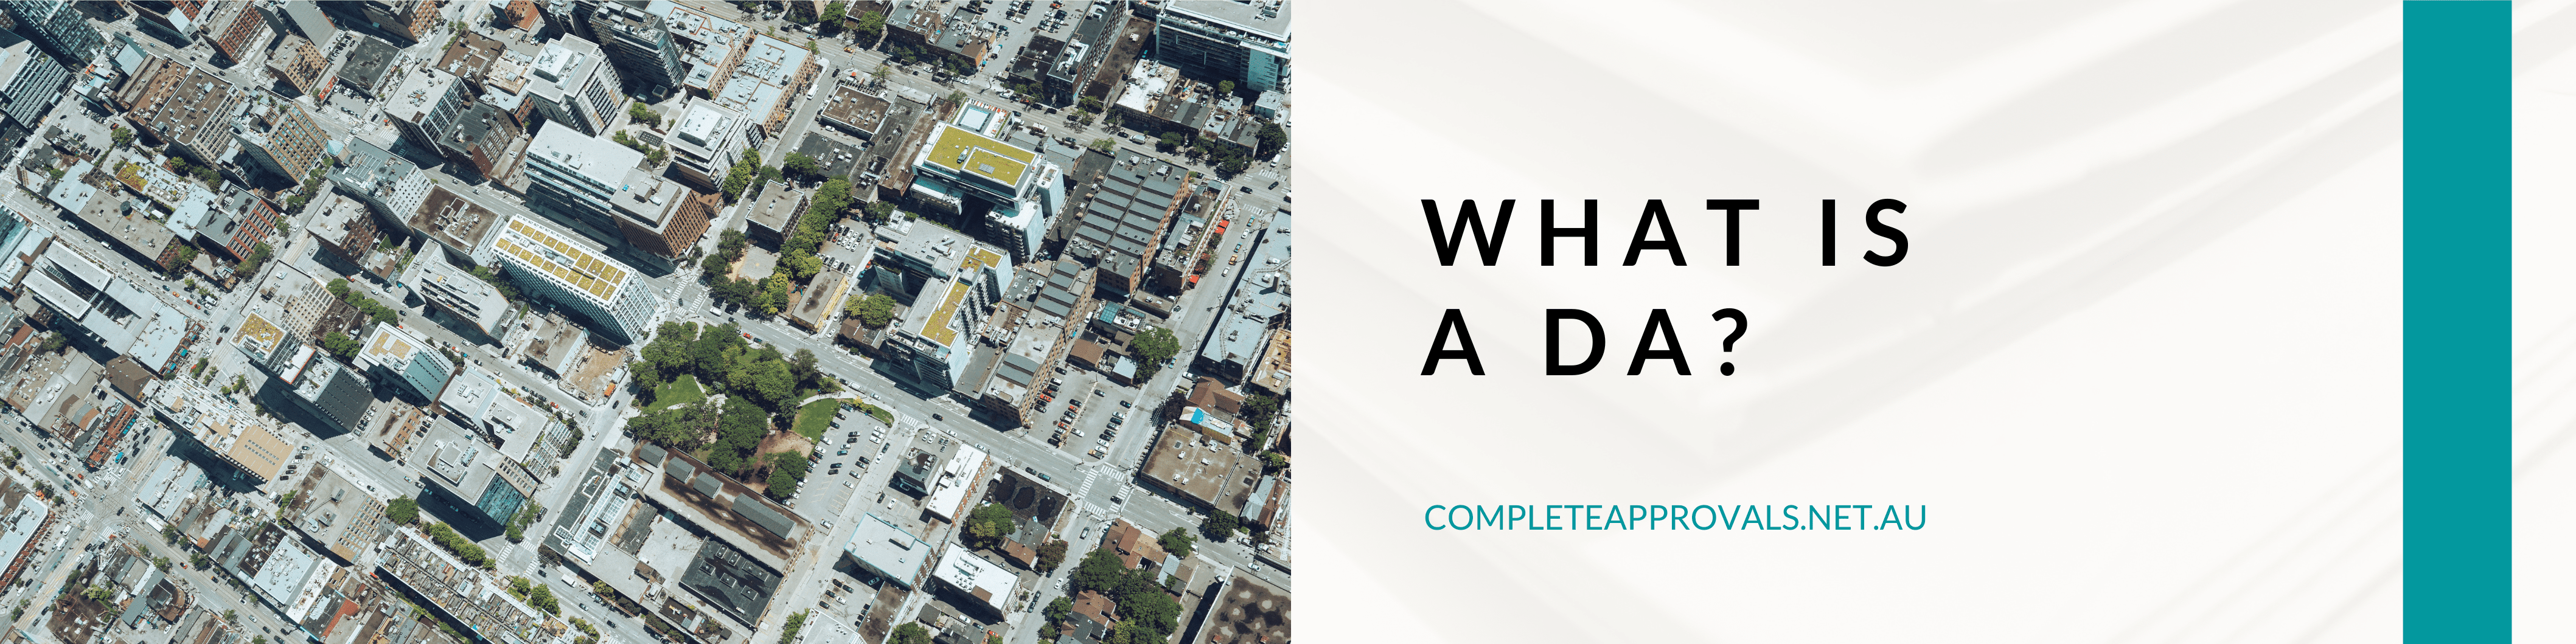 What is a DA? Complete Approvals